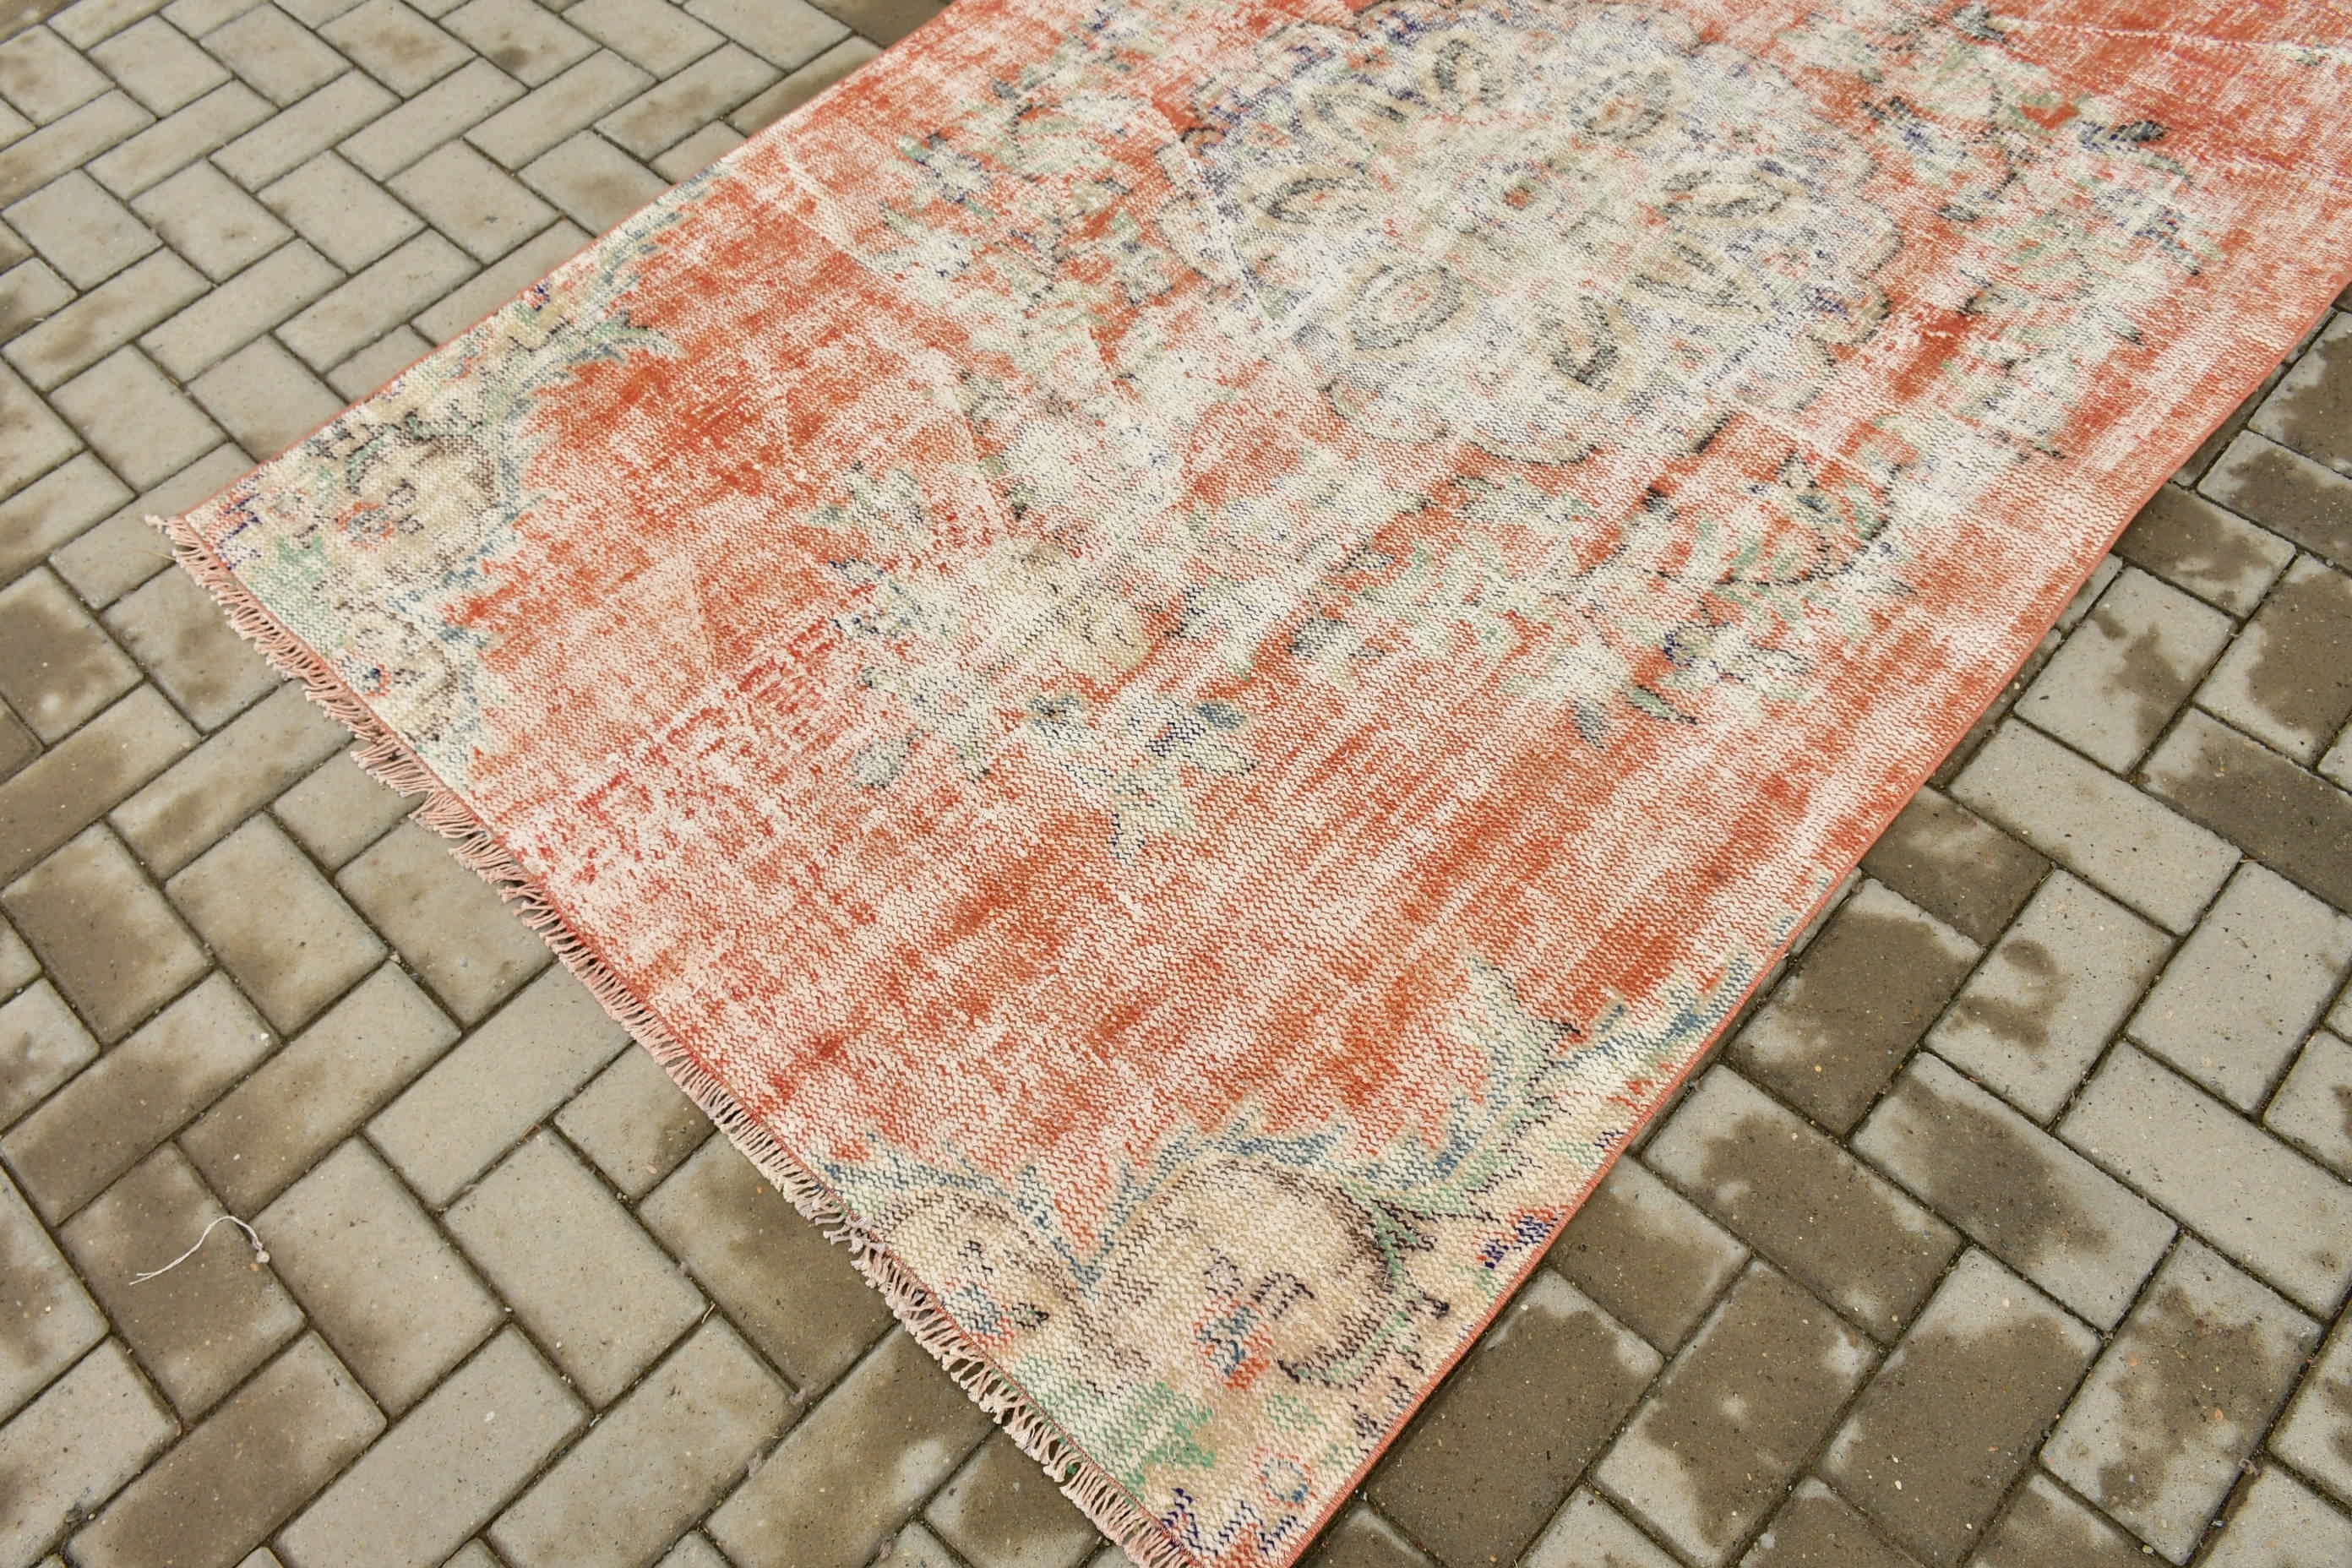 Vintage Rugs, 4.4x7.5 ft Area Rug, Kitchen Rug, Anatolian Rugs, Rugs for Kitchen, Antique Rug, Indoor Rug, Red Wool Rug, Turkish Rug